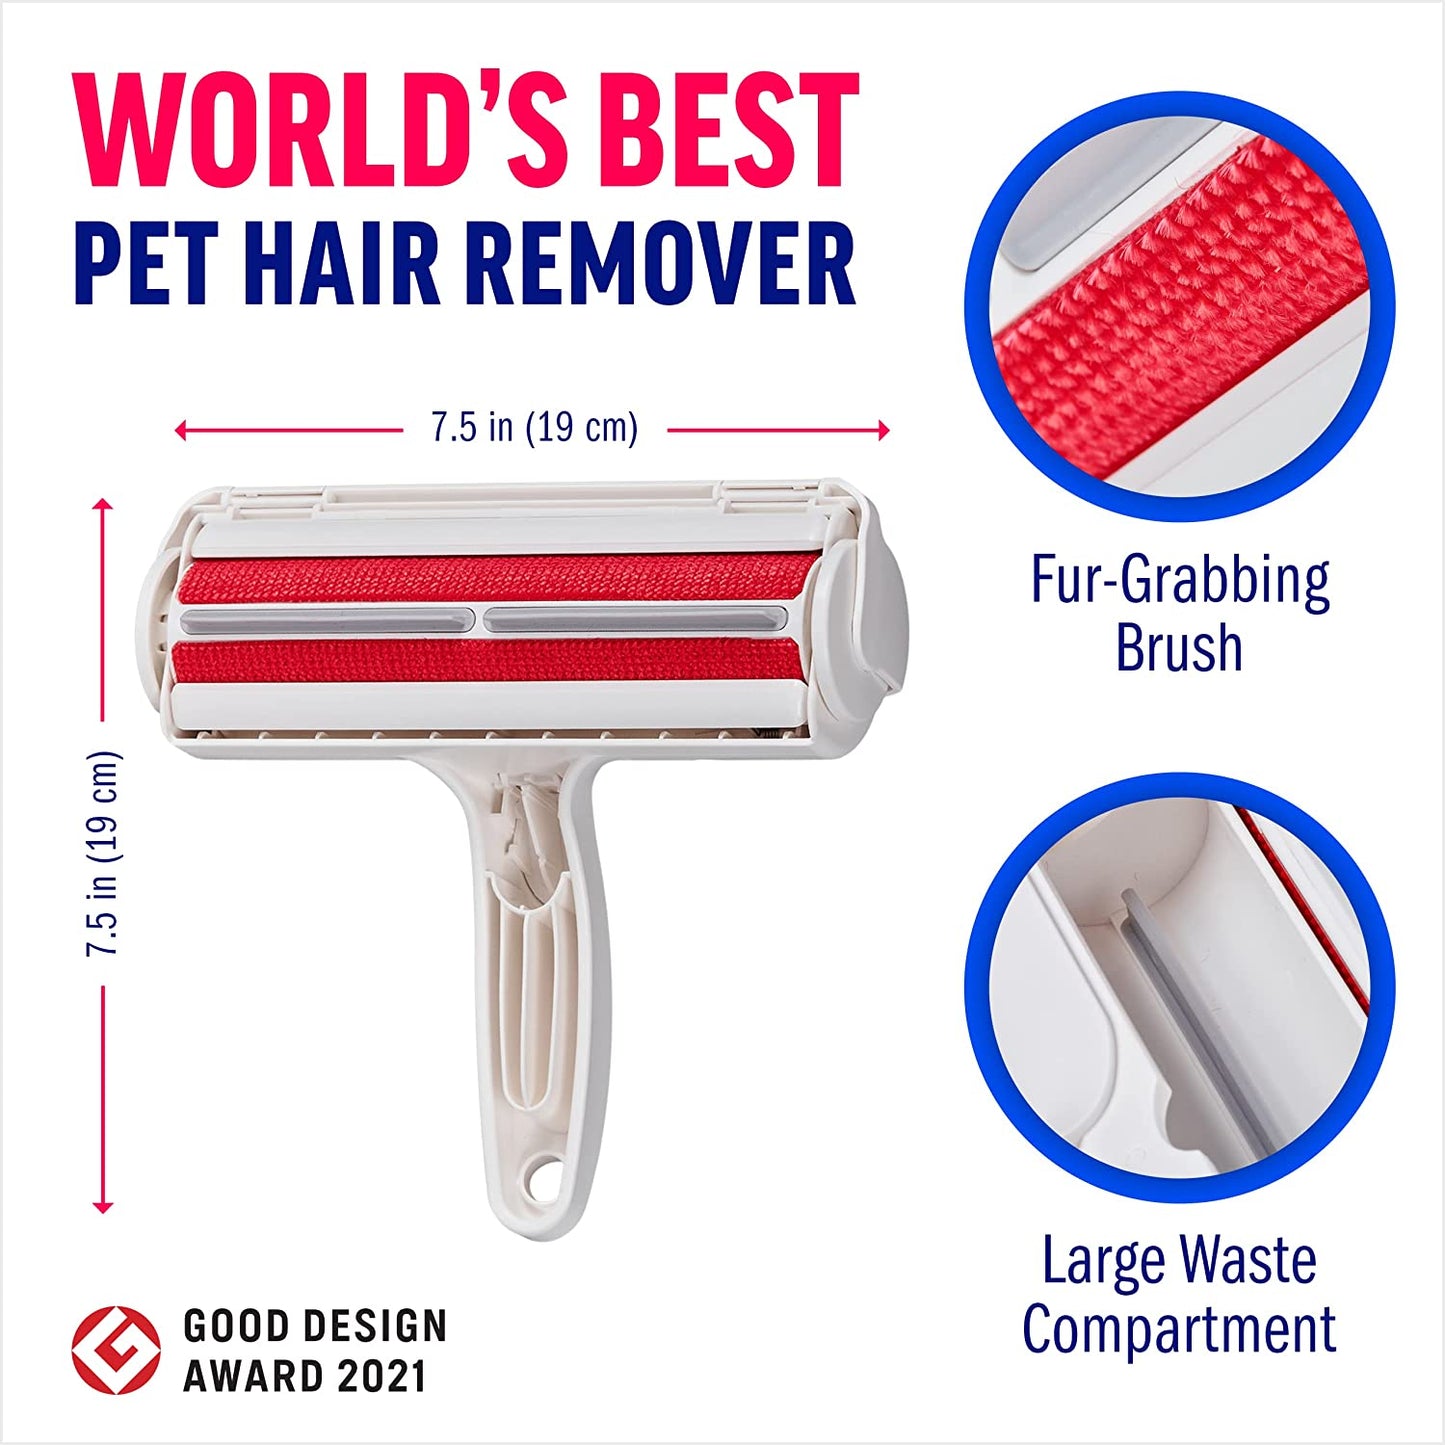 Pet Hair Remover Roller - Reusable, Portable Cat and Dog Hair Remover and Scraper - Carpet Brush Hair Removal Tool - Animal Fur Lint Remover for Carpet, Clothes, Furniture, Car and Bedding - FoxMart™️ - ChomChom